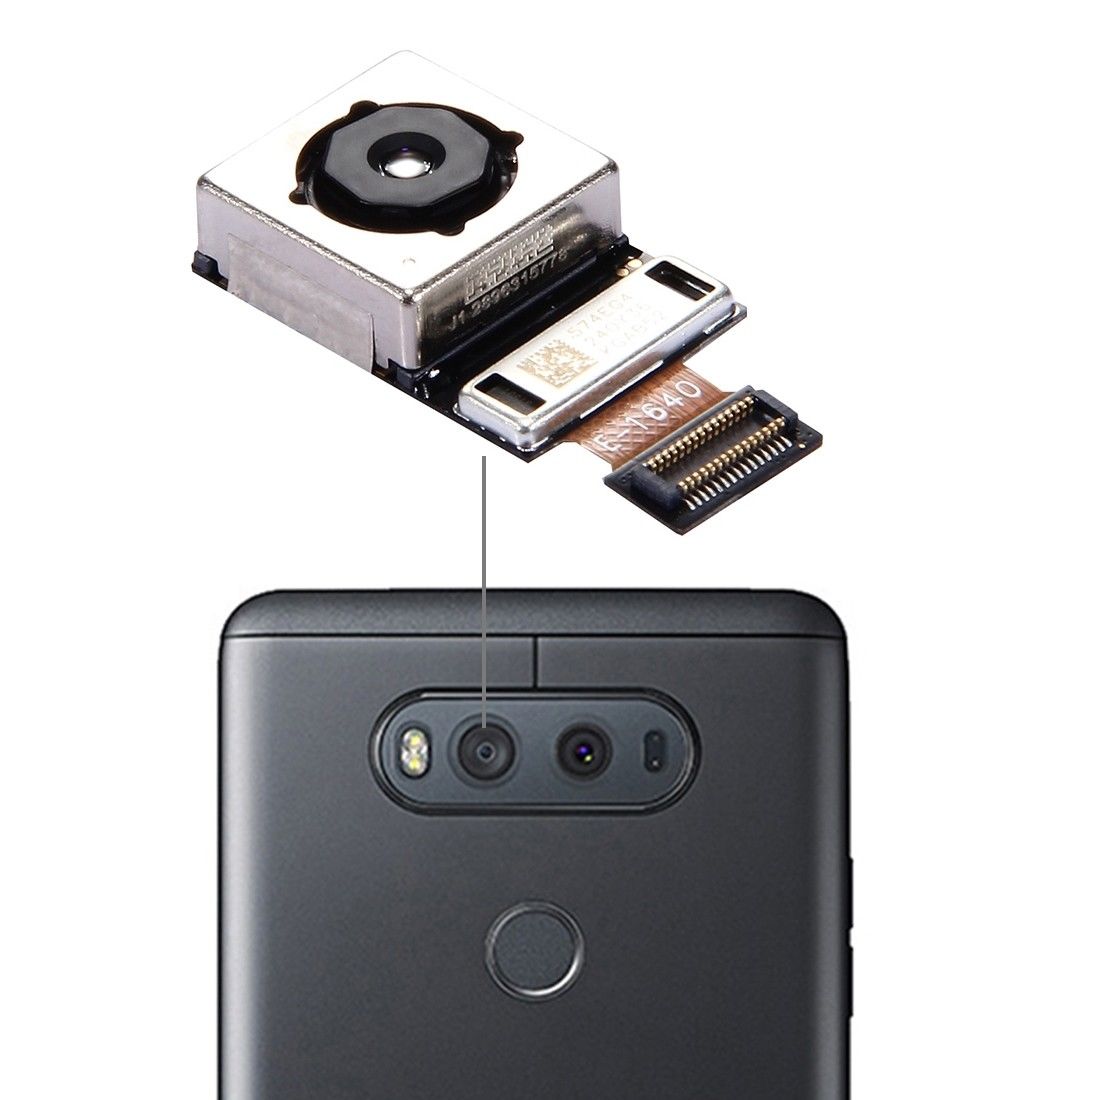 LG V20 - Genuine Rear Main Camera Module for [product_price] - First Help Tech